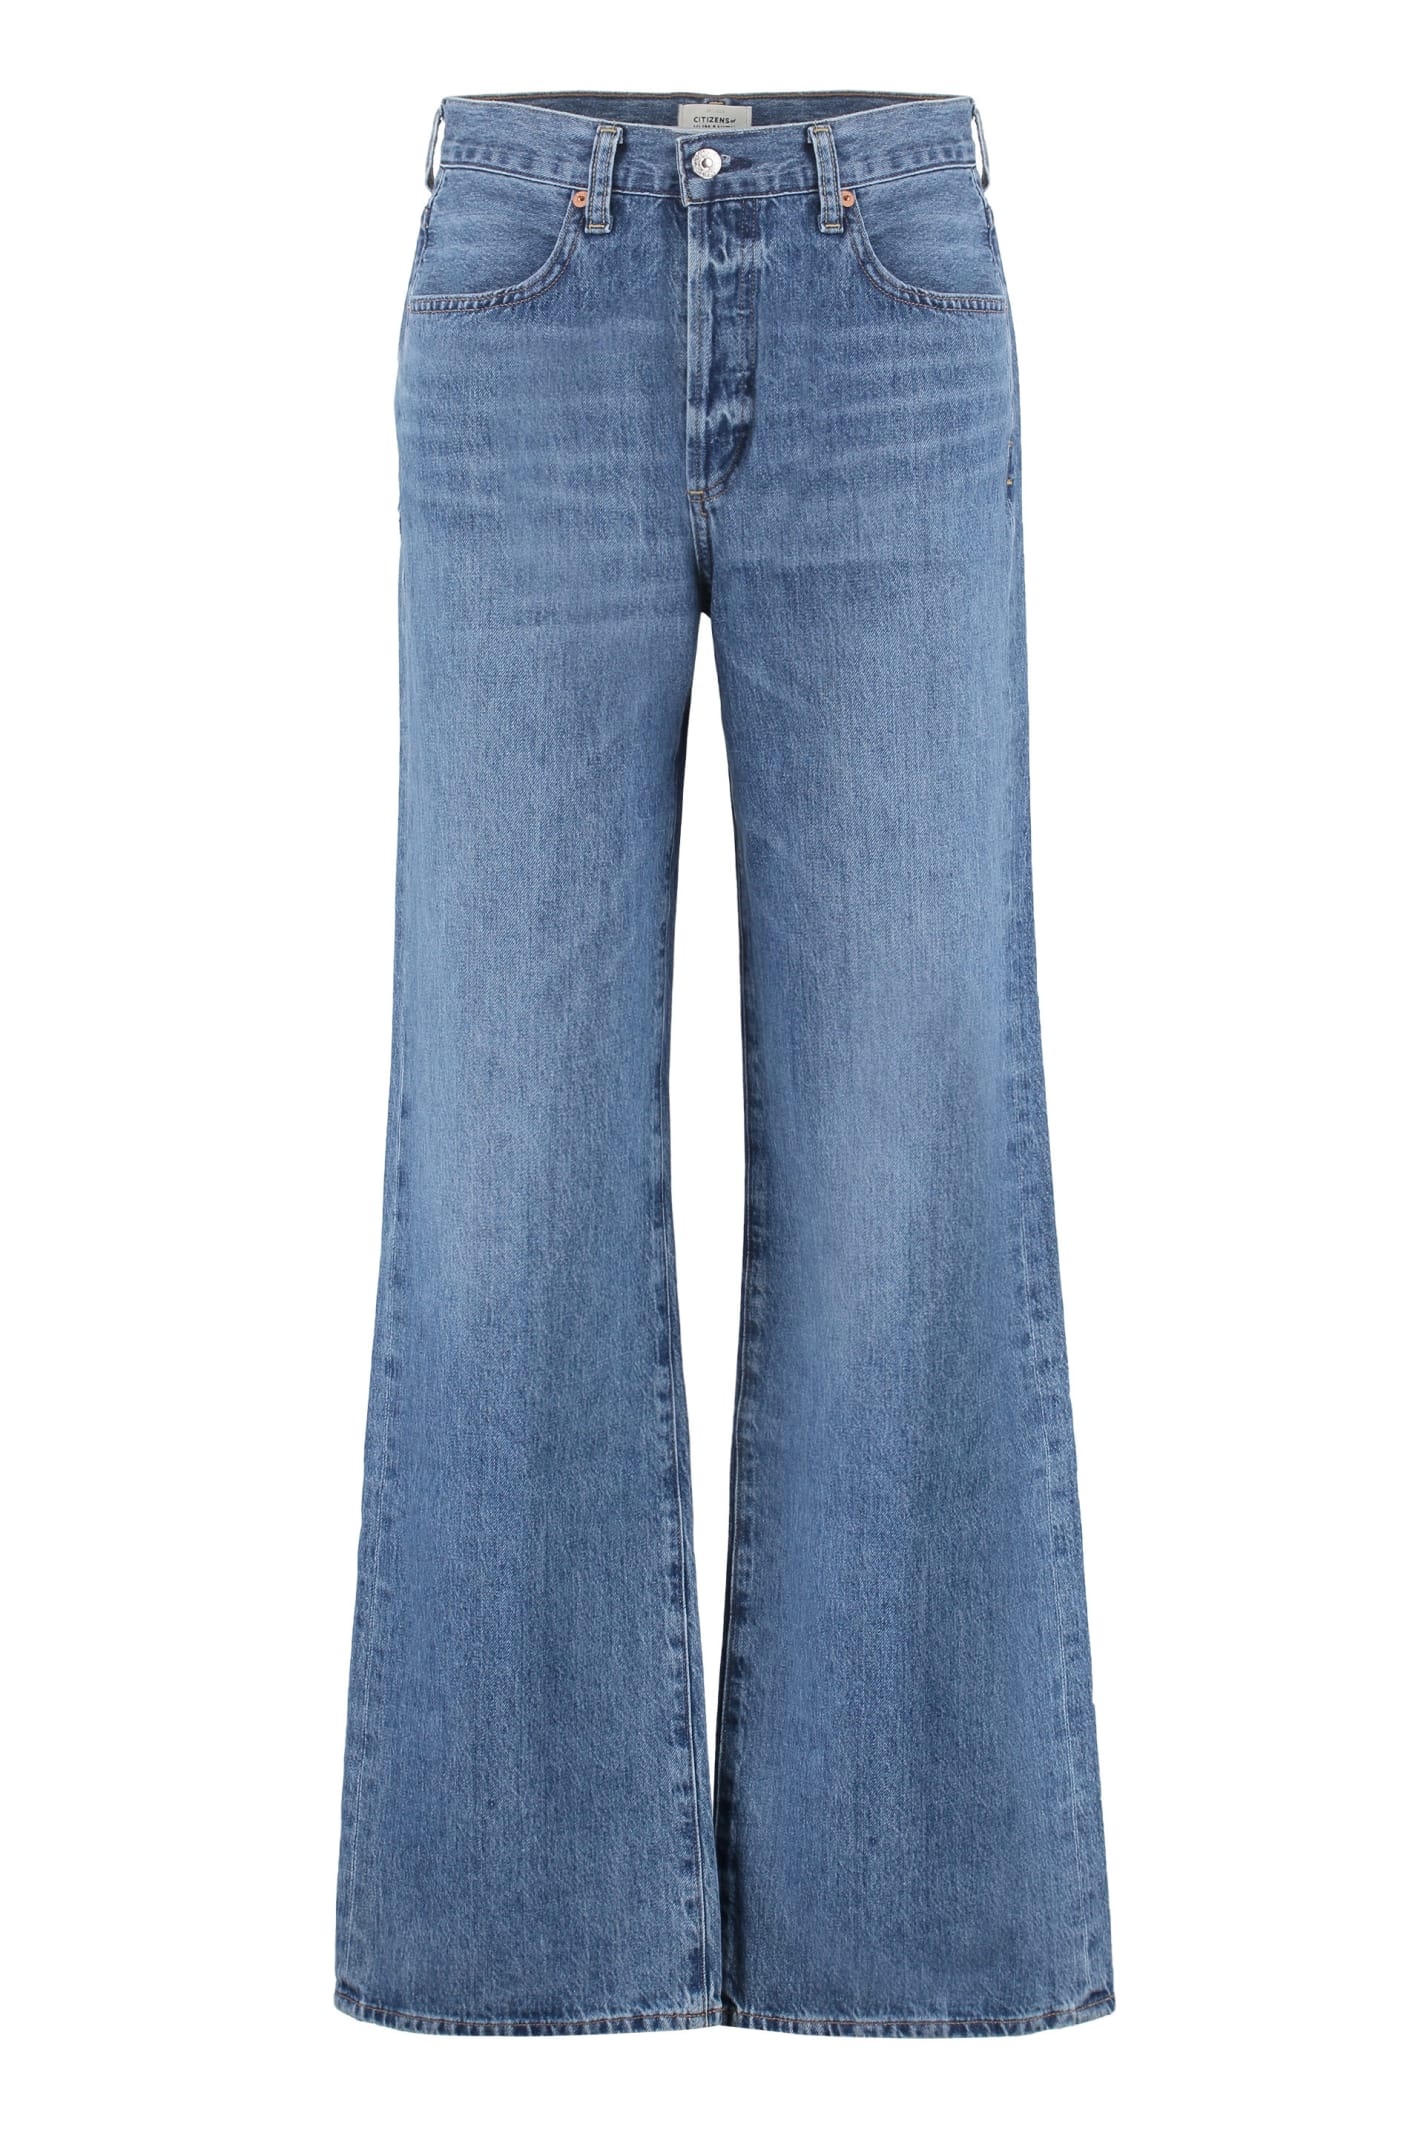 CITIZENS OF HUMANITY ANNINA WIDE LEG JEANS